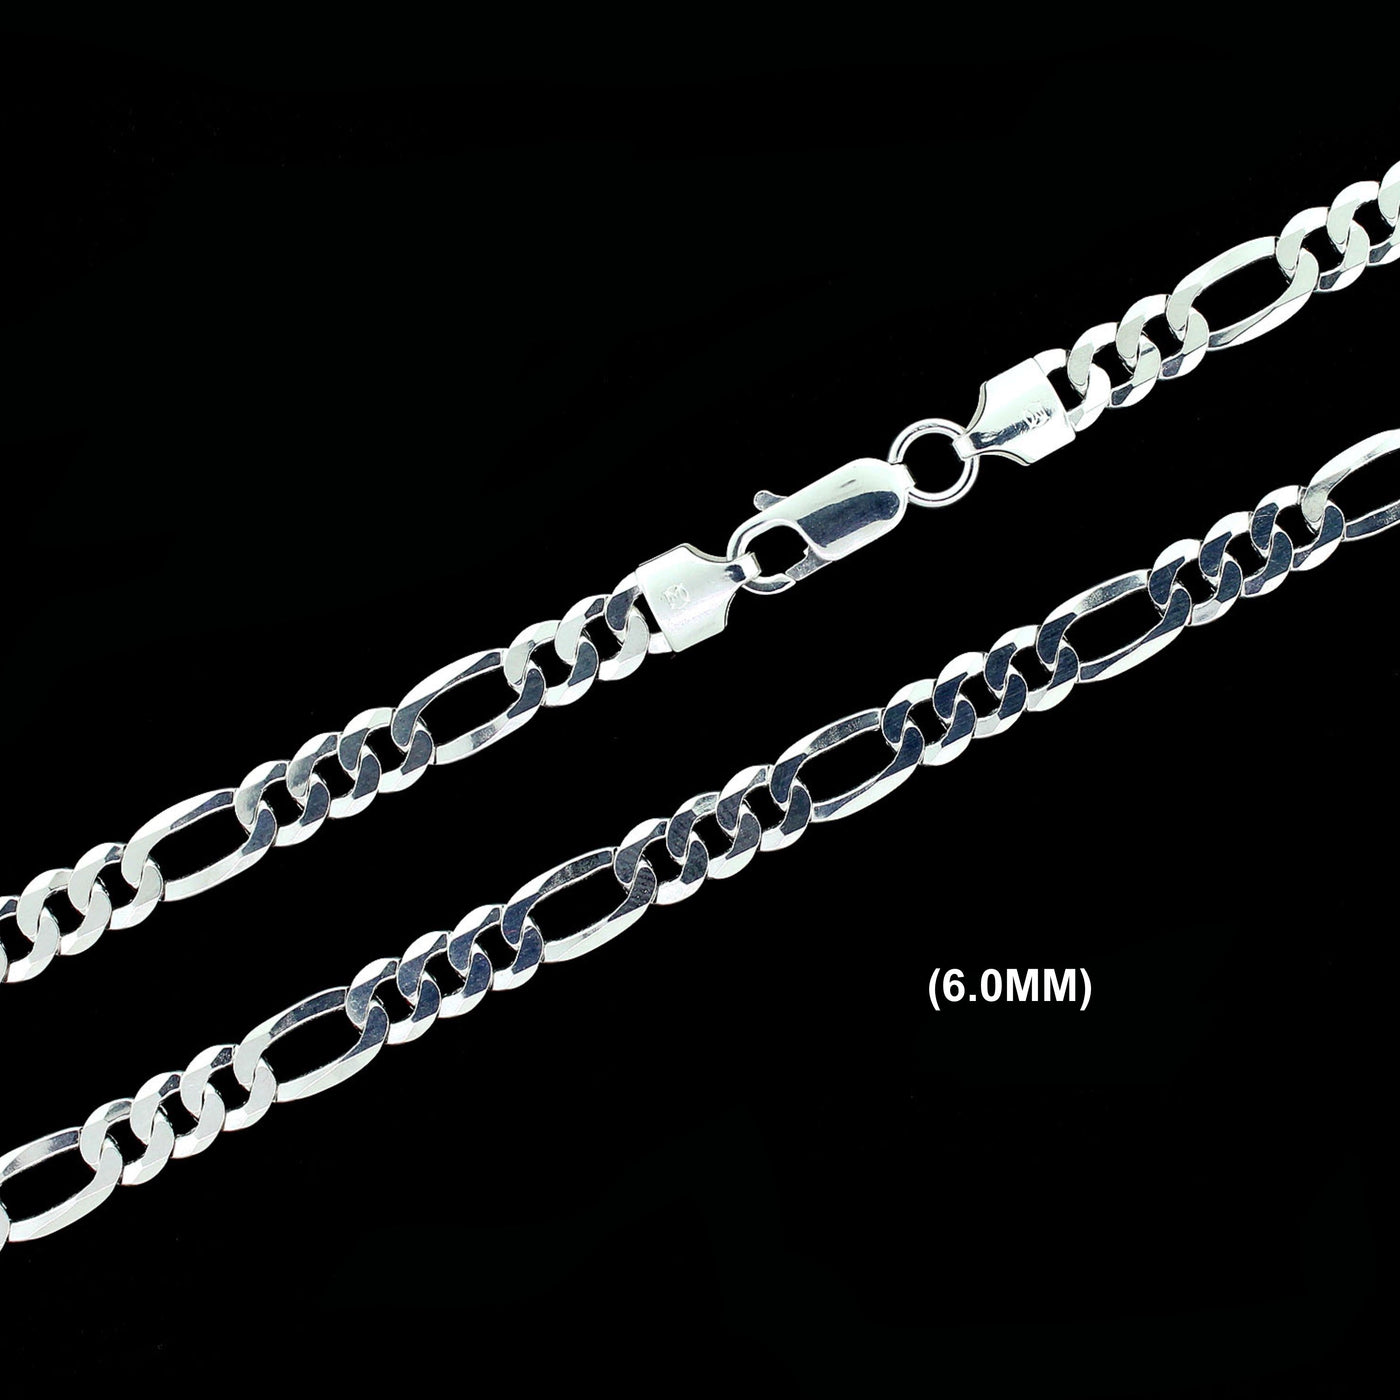 6MM Solid 925 Sterling Silver Figaro Link Chain Necklace or Bracelet ITALY